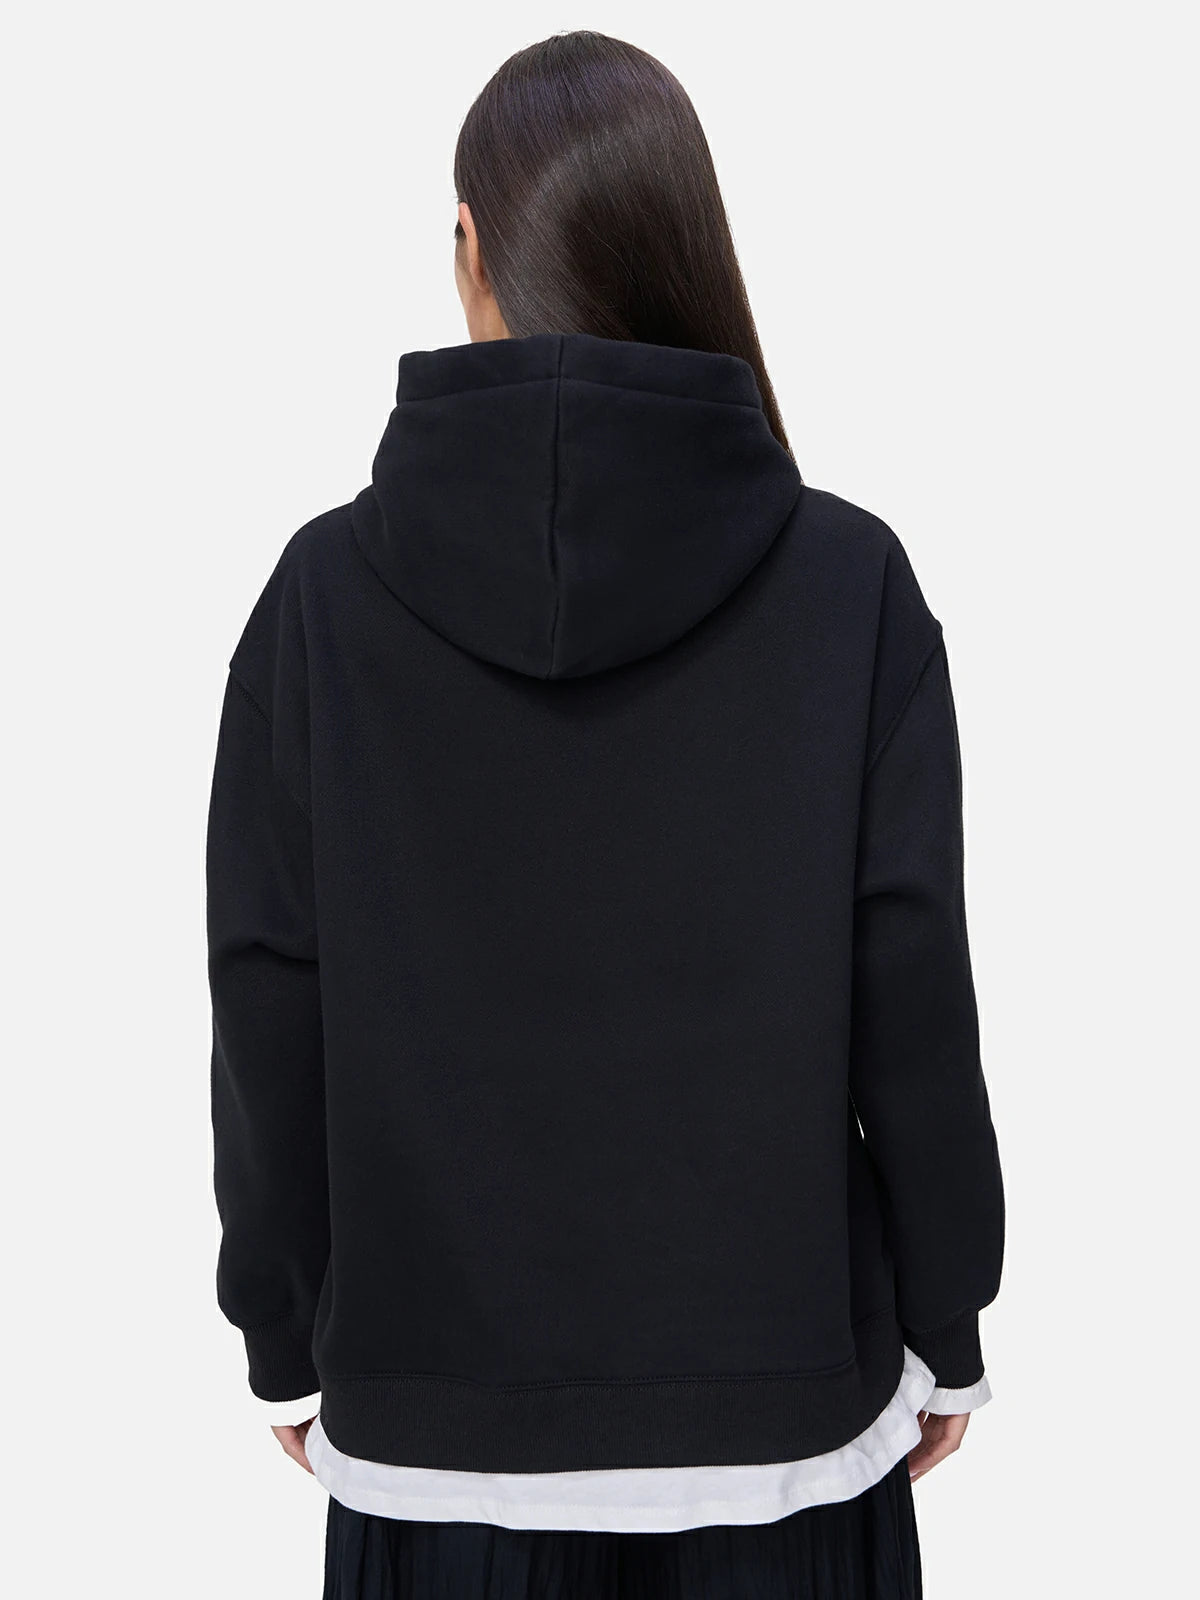 Winter warmth meets fashion in this black loose-fitting hooded sweatshirt 